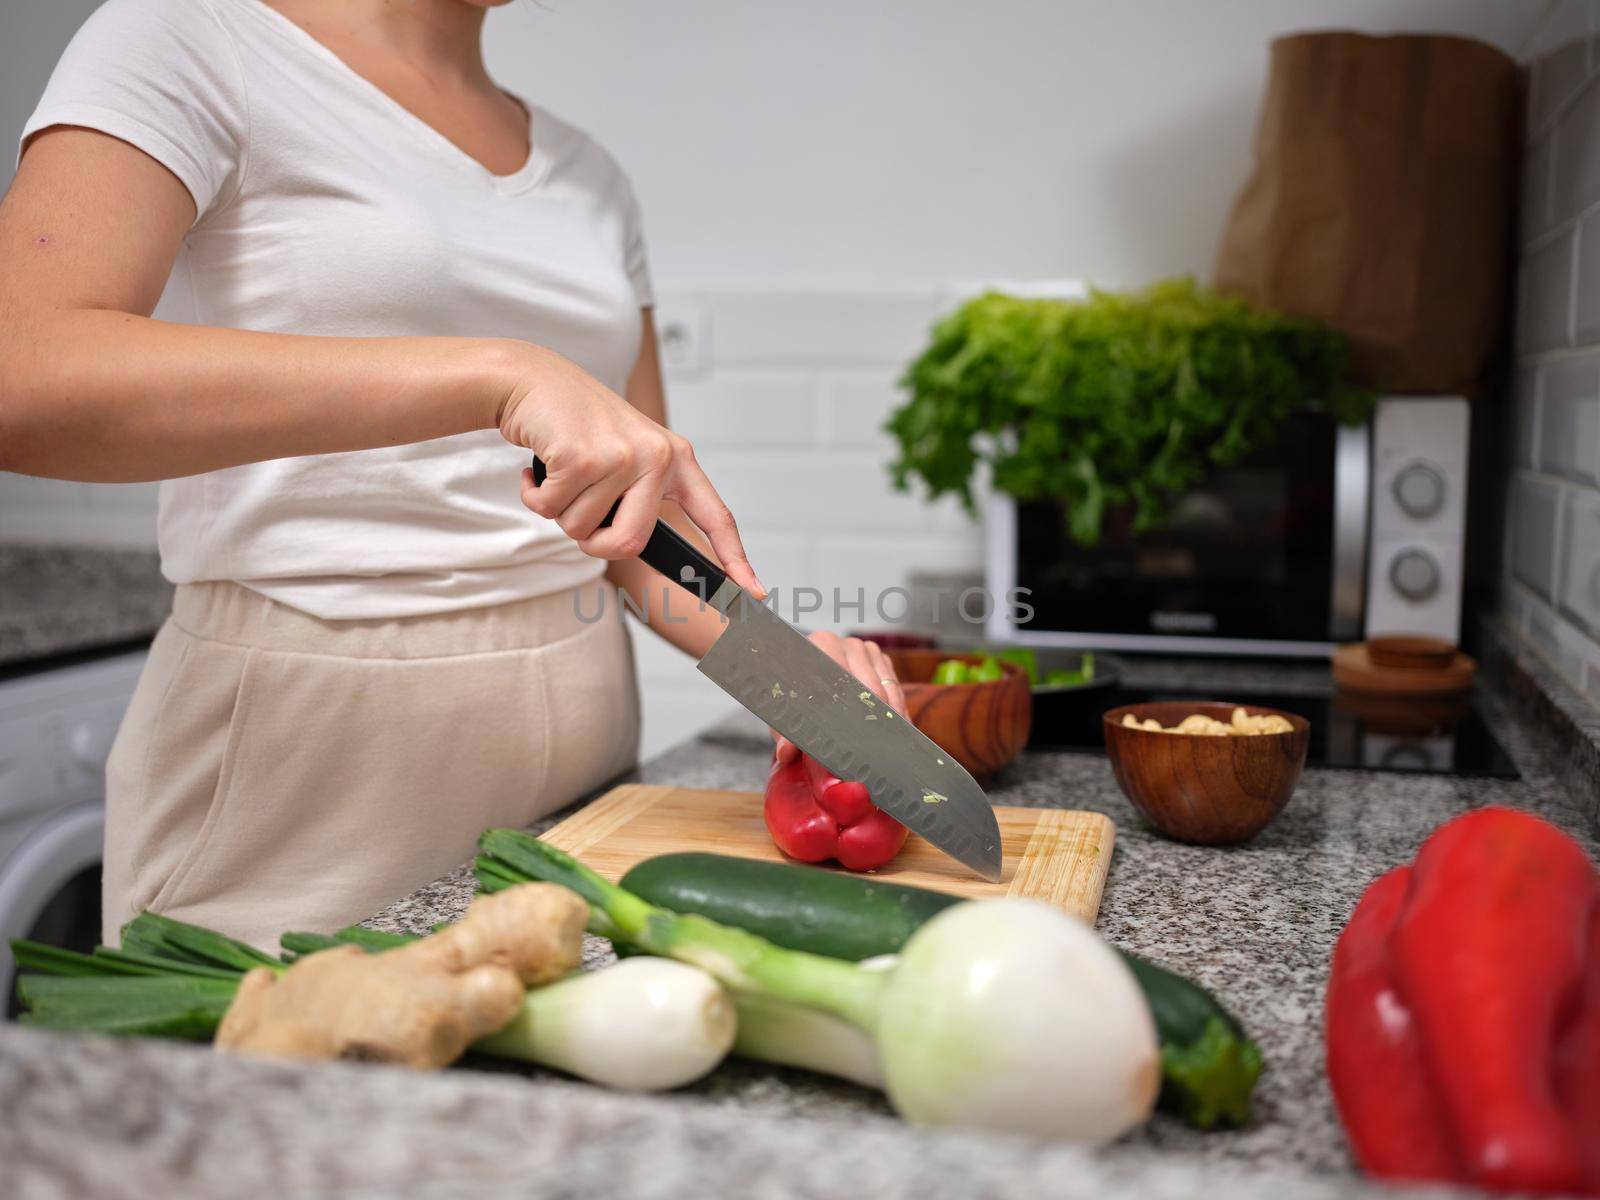 side view of a woman splitting a red pepper with a kitchen knife, vegetables around the worktop